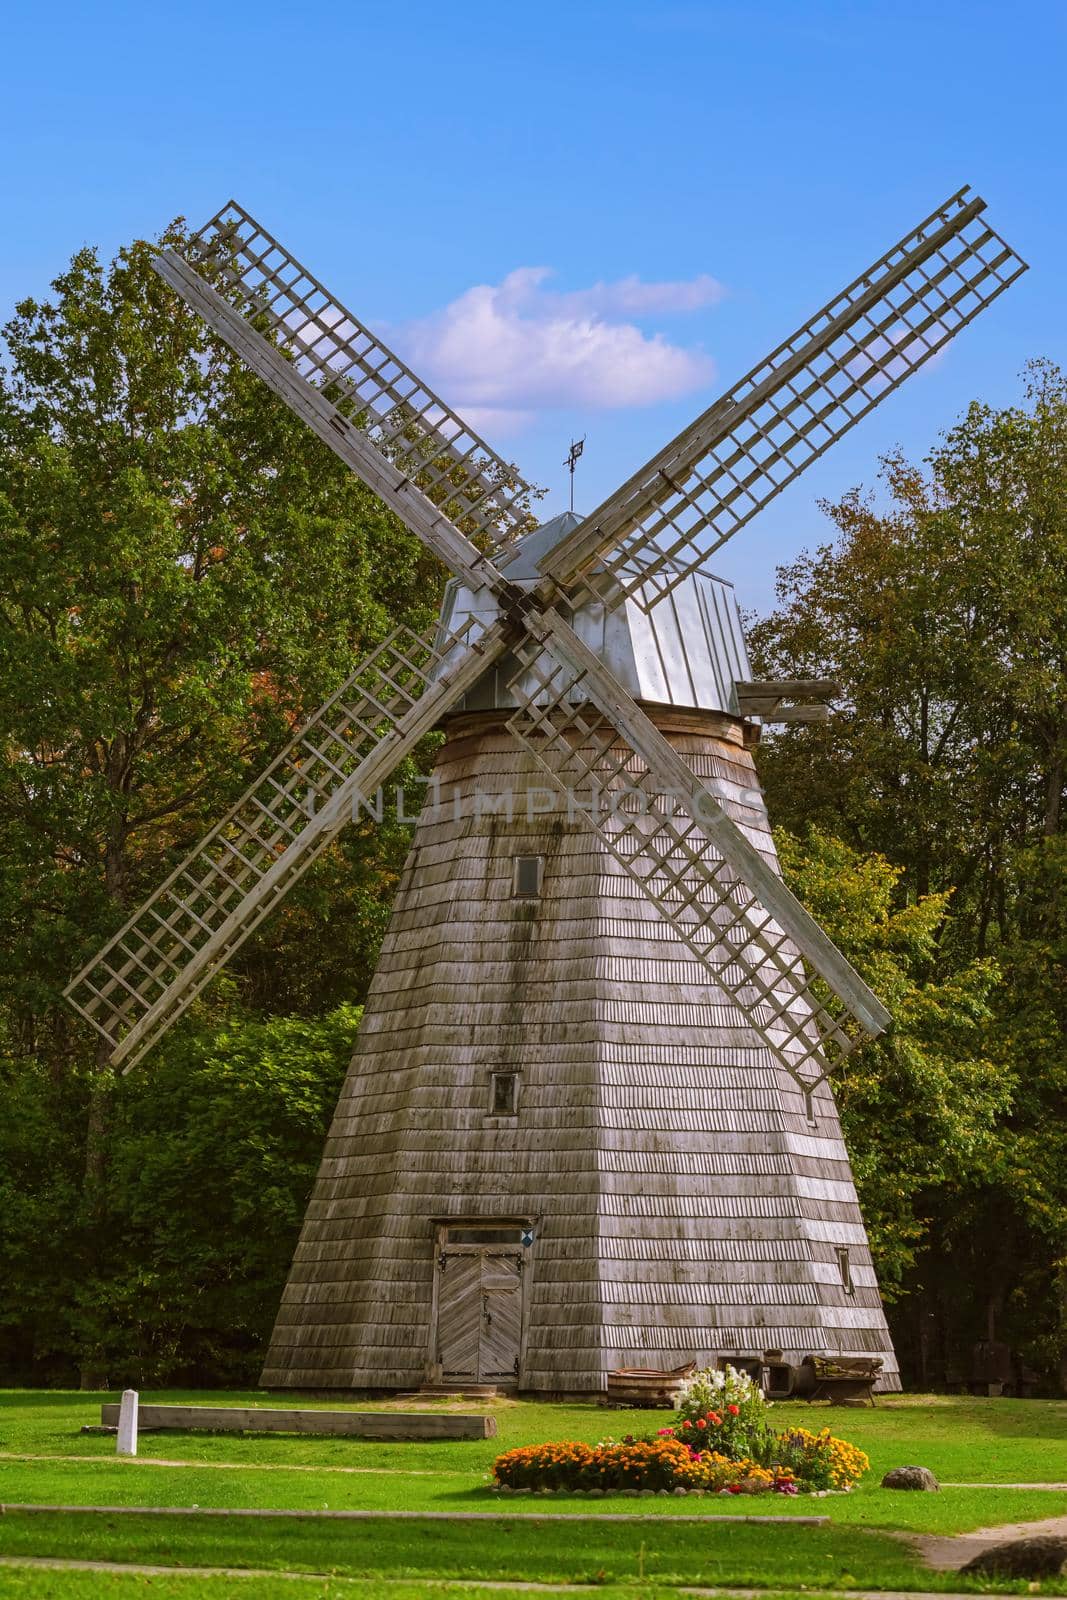 Old wooden windmill by SNR